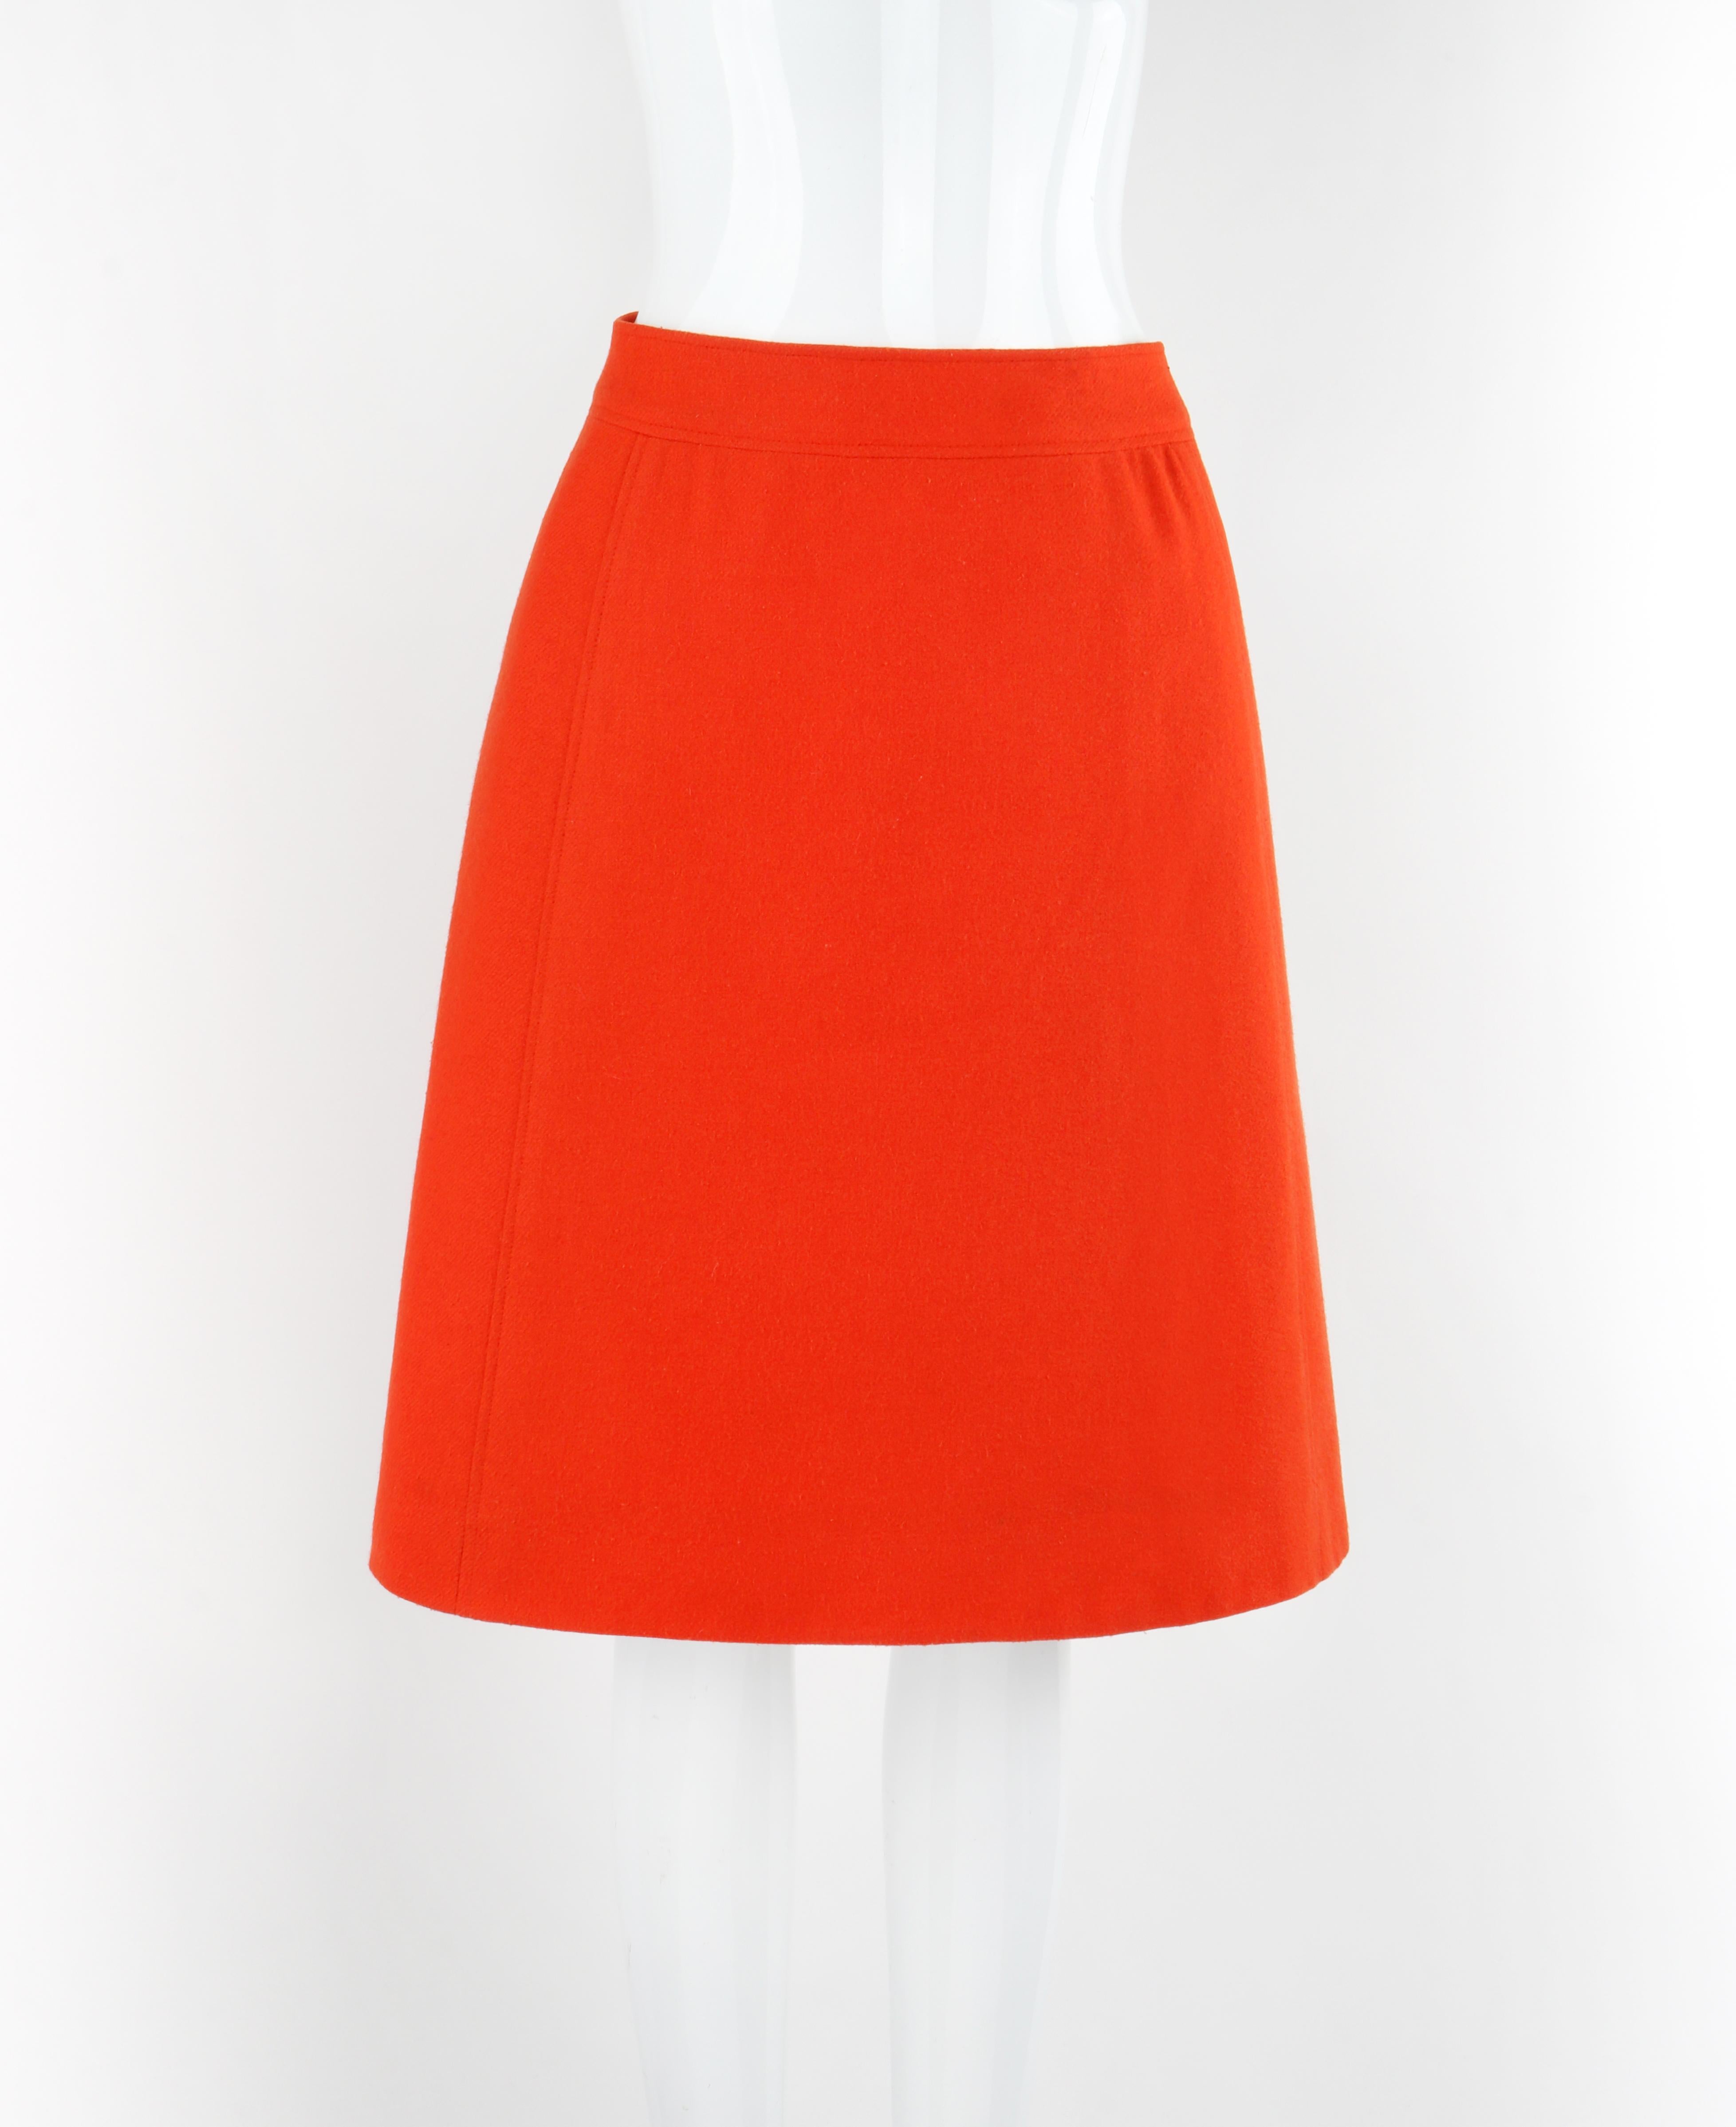 COURREGES c.1970's Orange Wool Classic Tailored A-Line Knee Length Skirt In Good Condition For Sale In Thiensville, WI